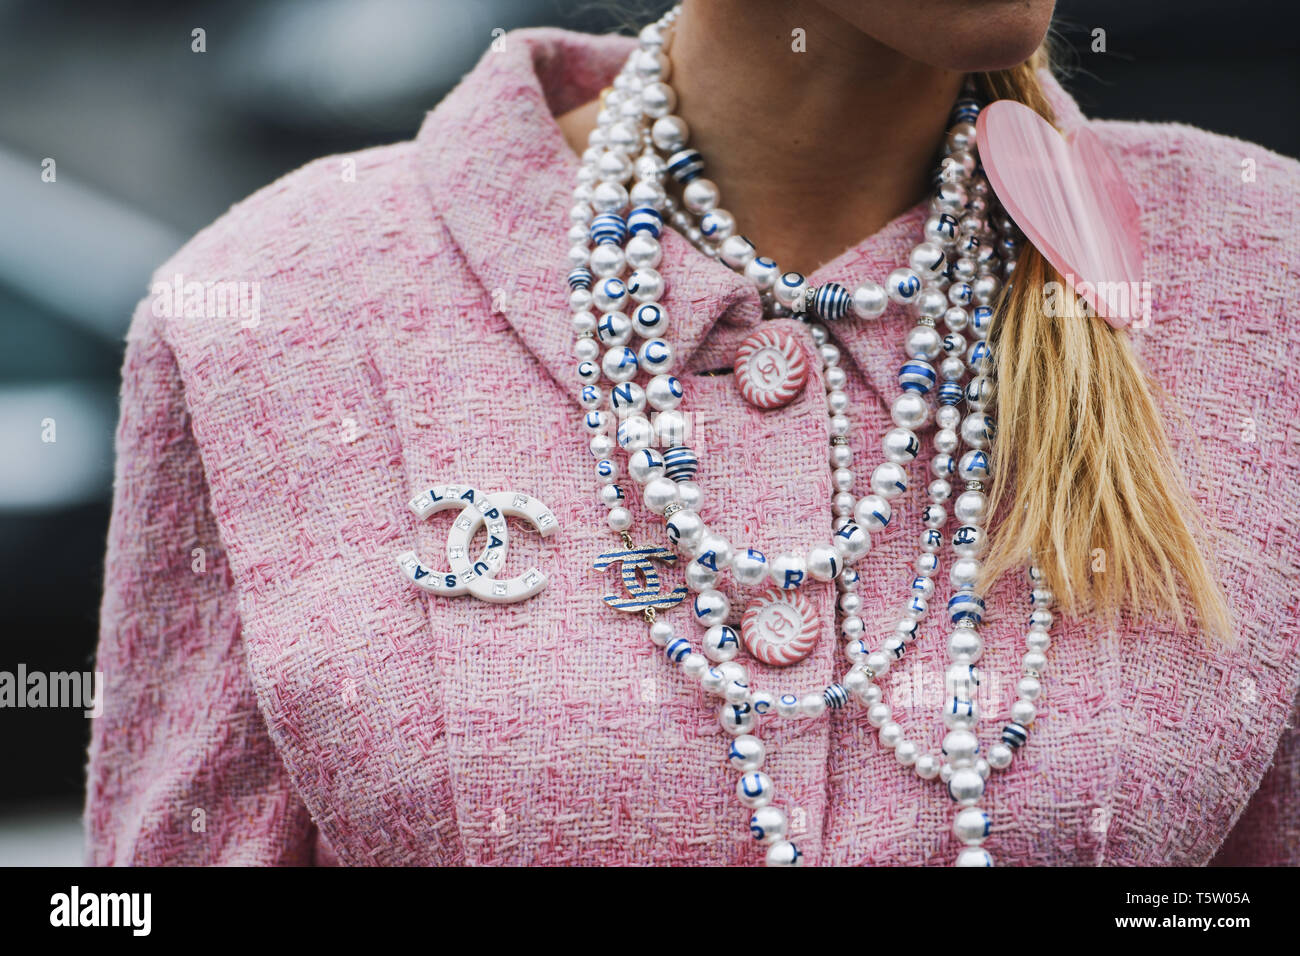 Paris, France - March 5, 2019: Street style - Woman wearing Chanel outfit before a fashion show during Paris Fashion Week - PFWFW19 Stock Photo